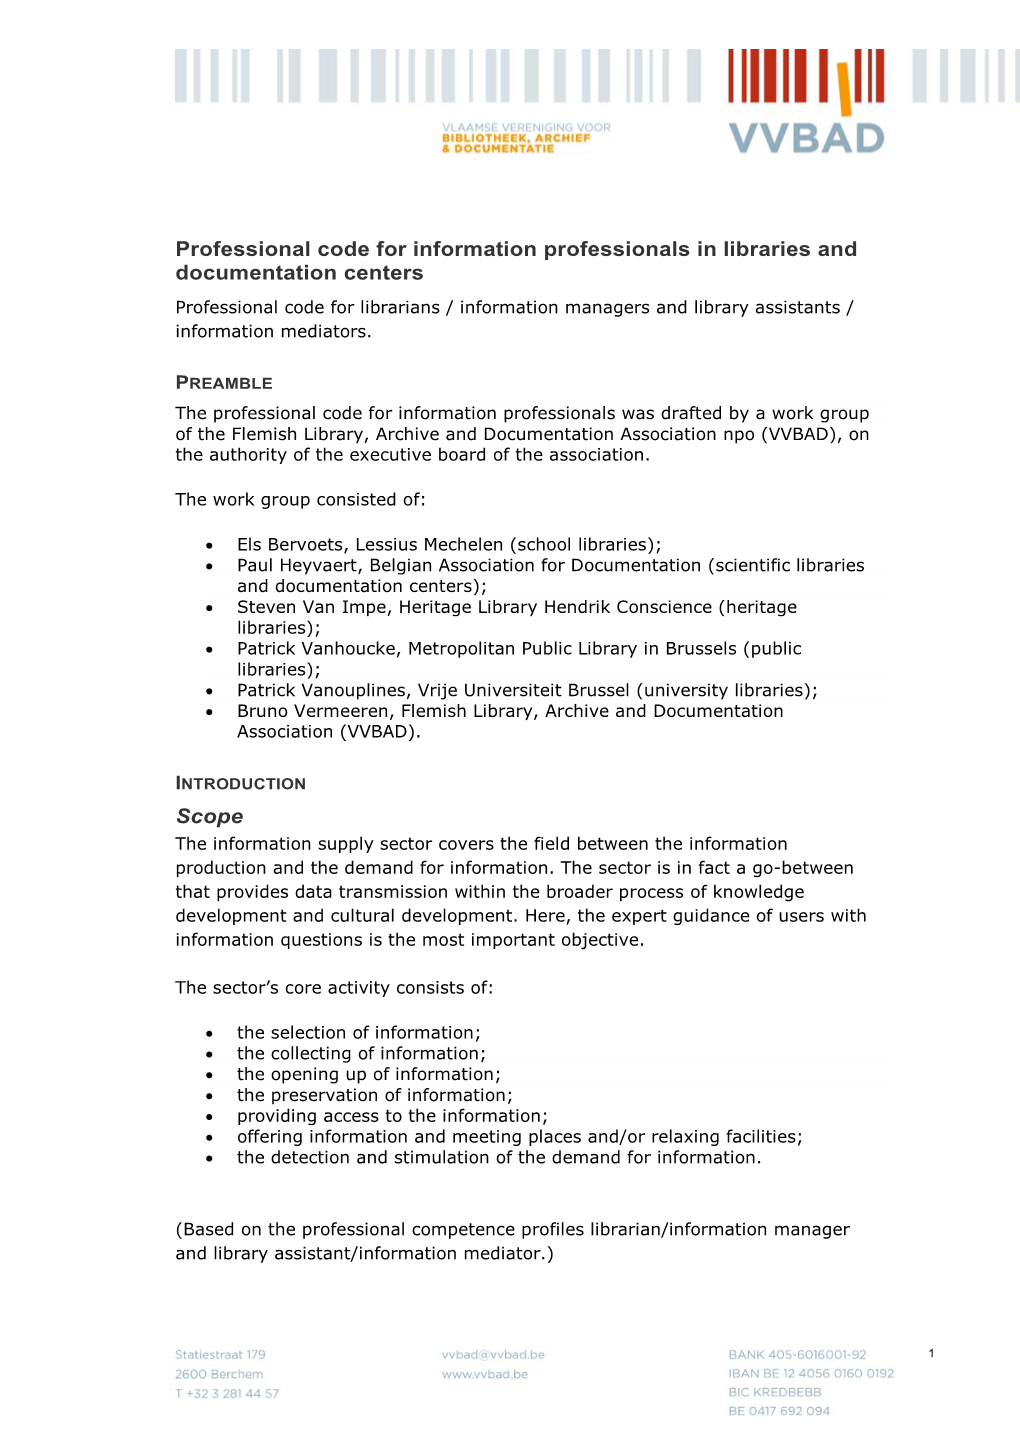 Professional Code for Information Professionals in Libraries And